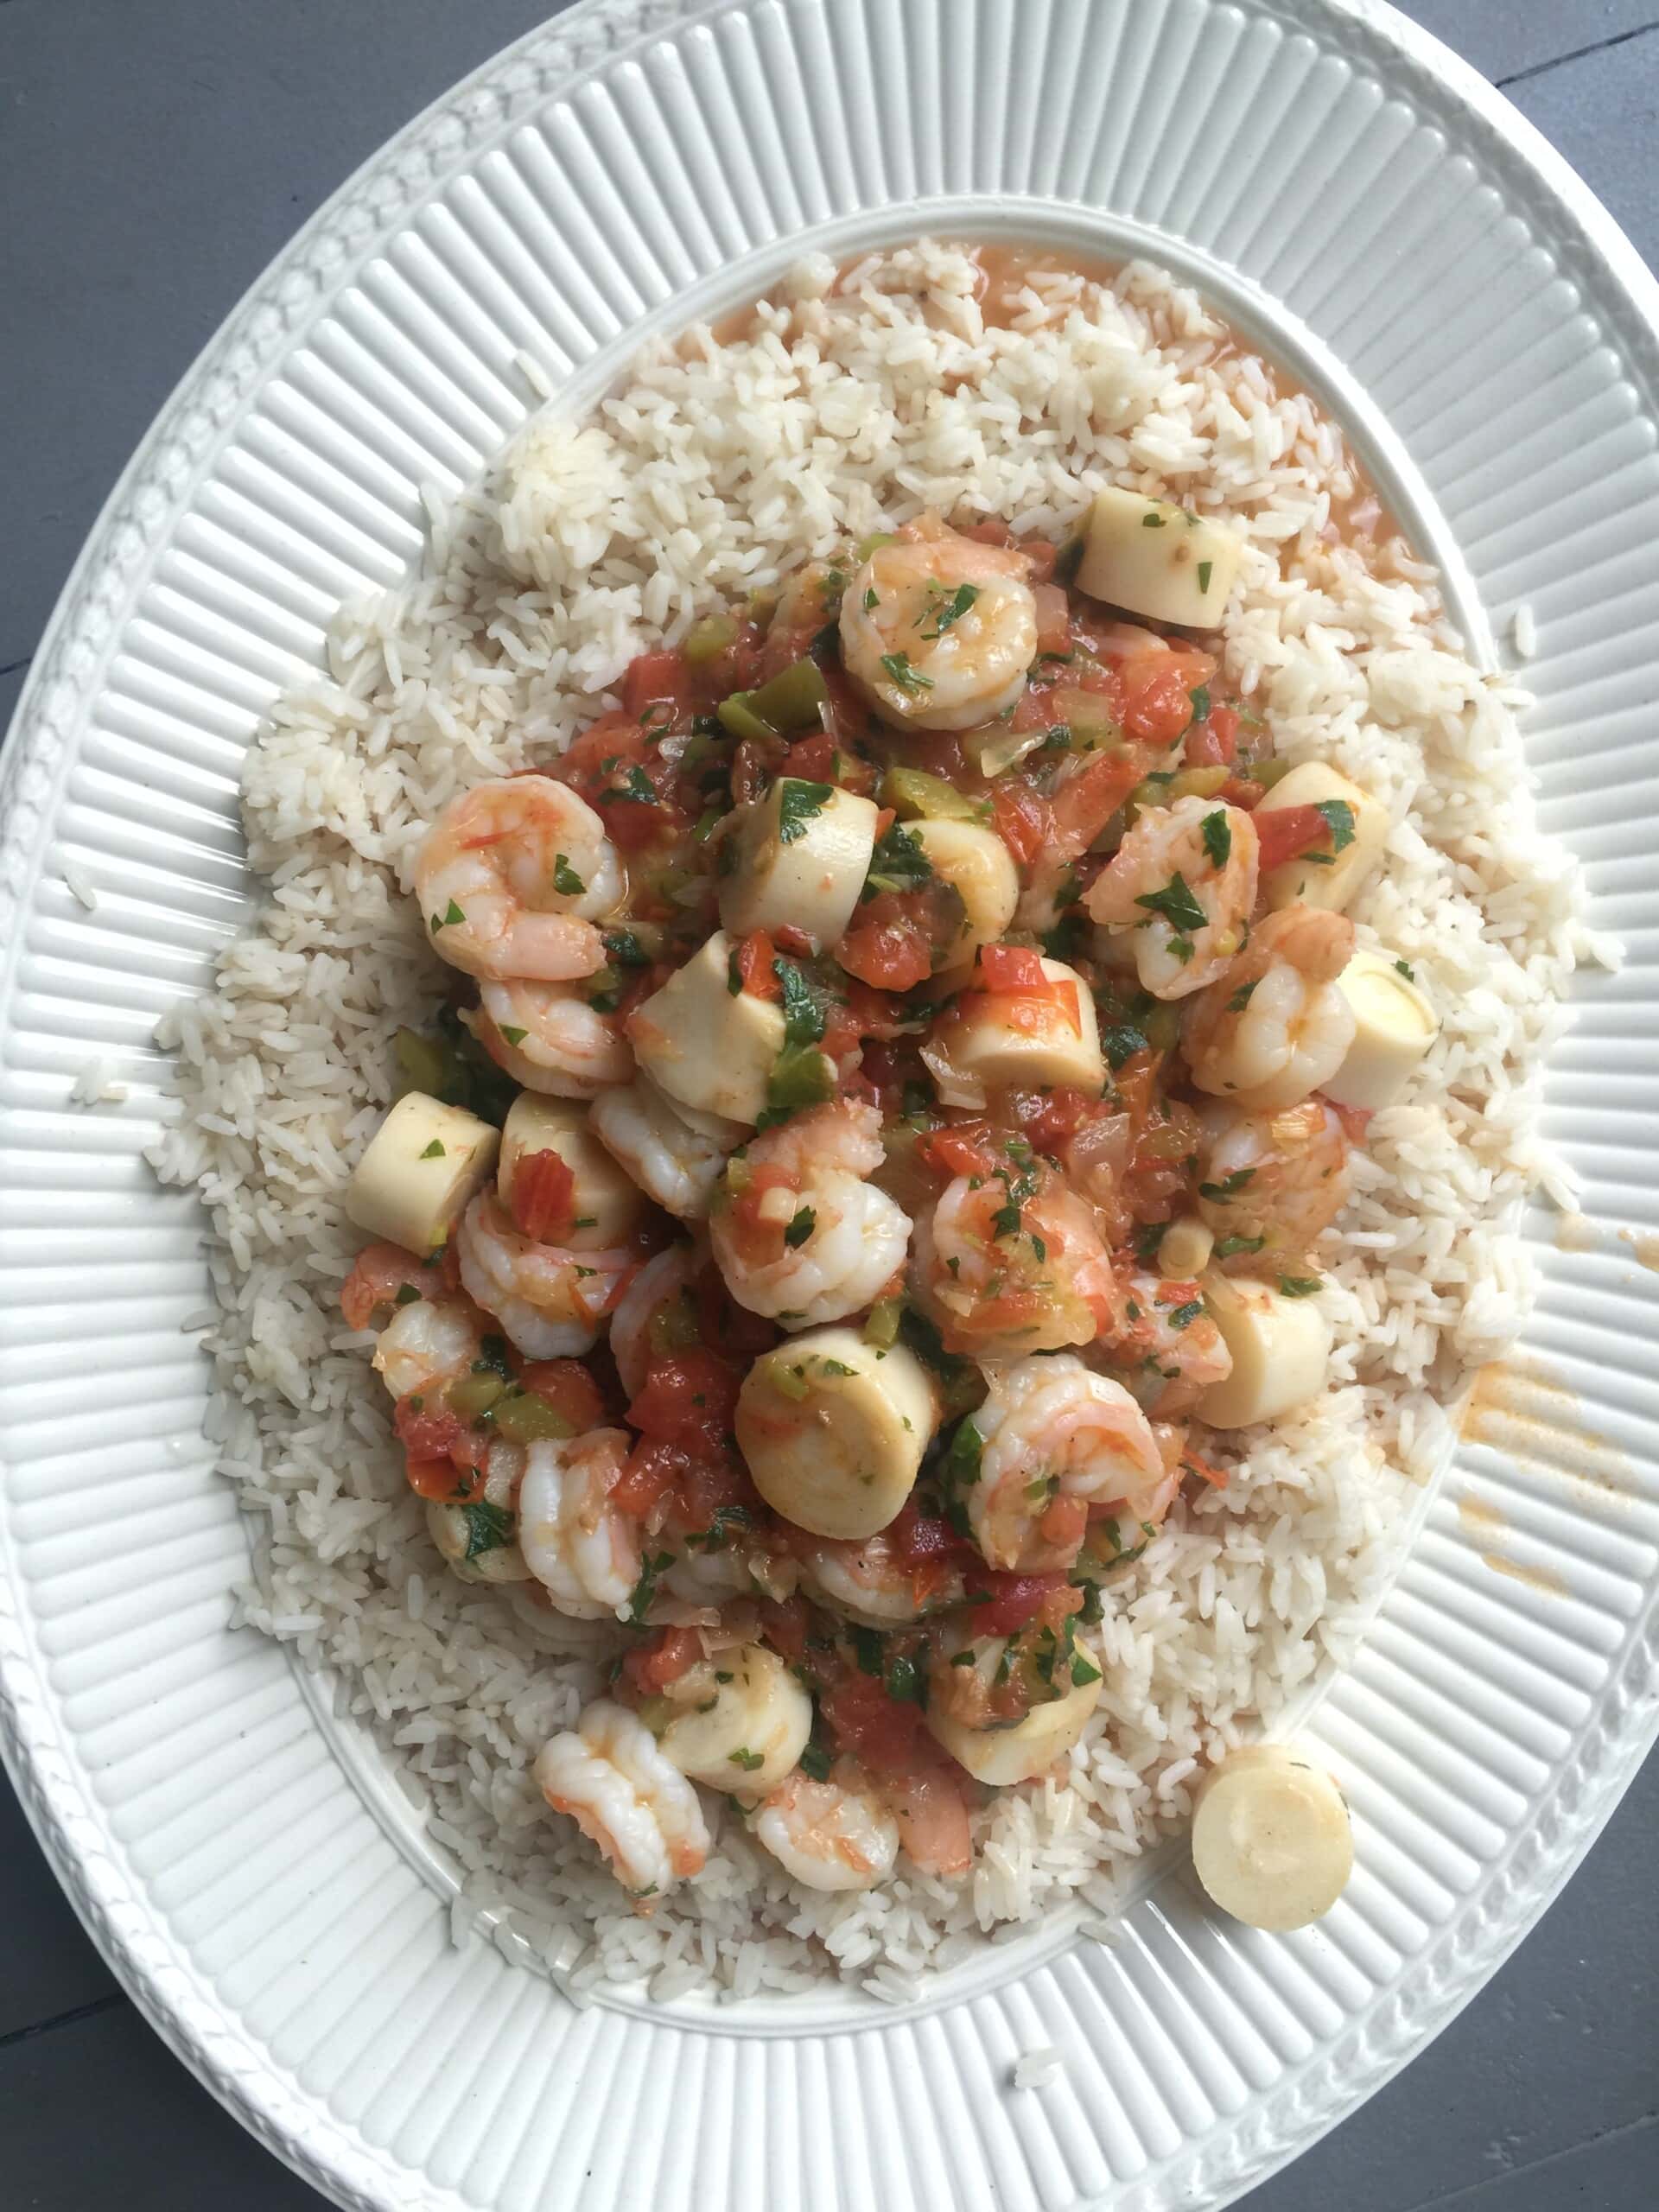 Hearts of palm and shrimp over a bed of rice.